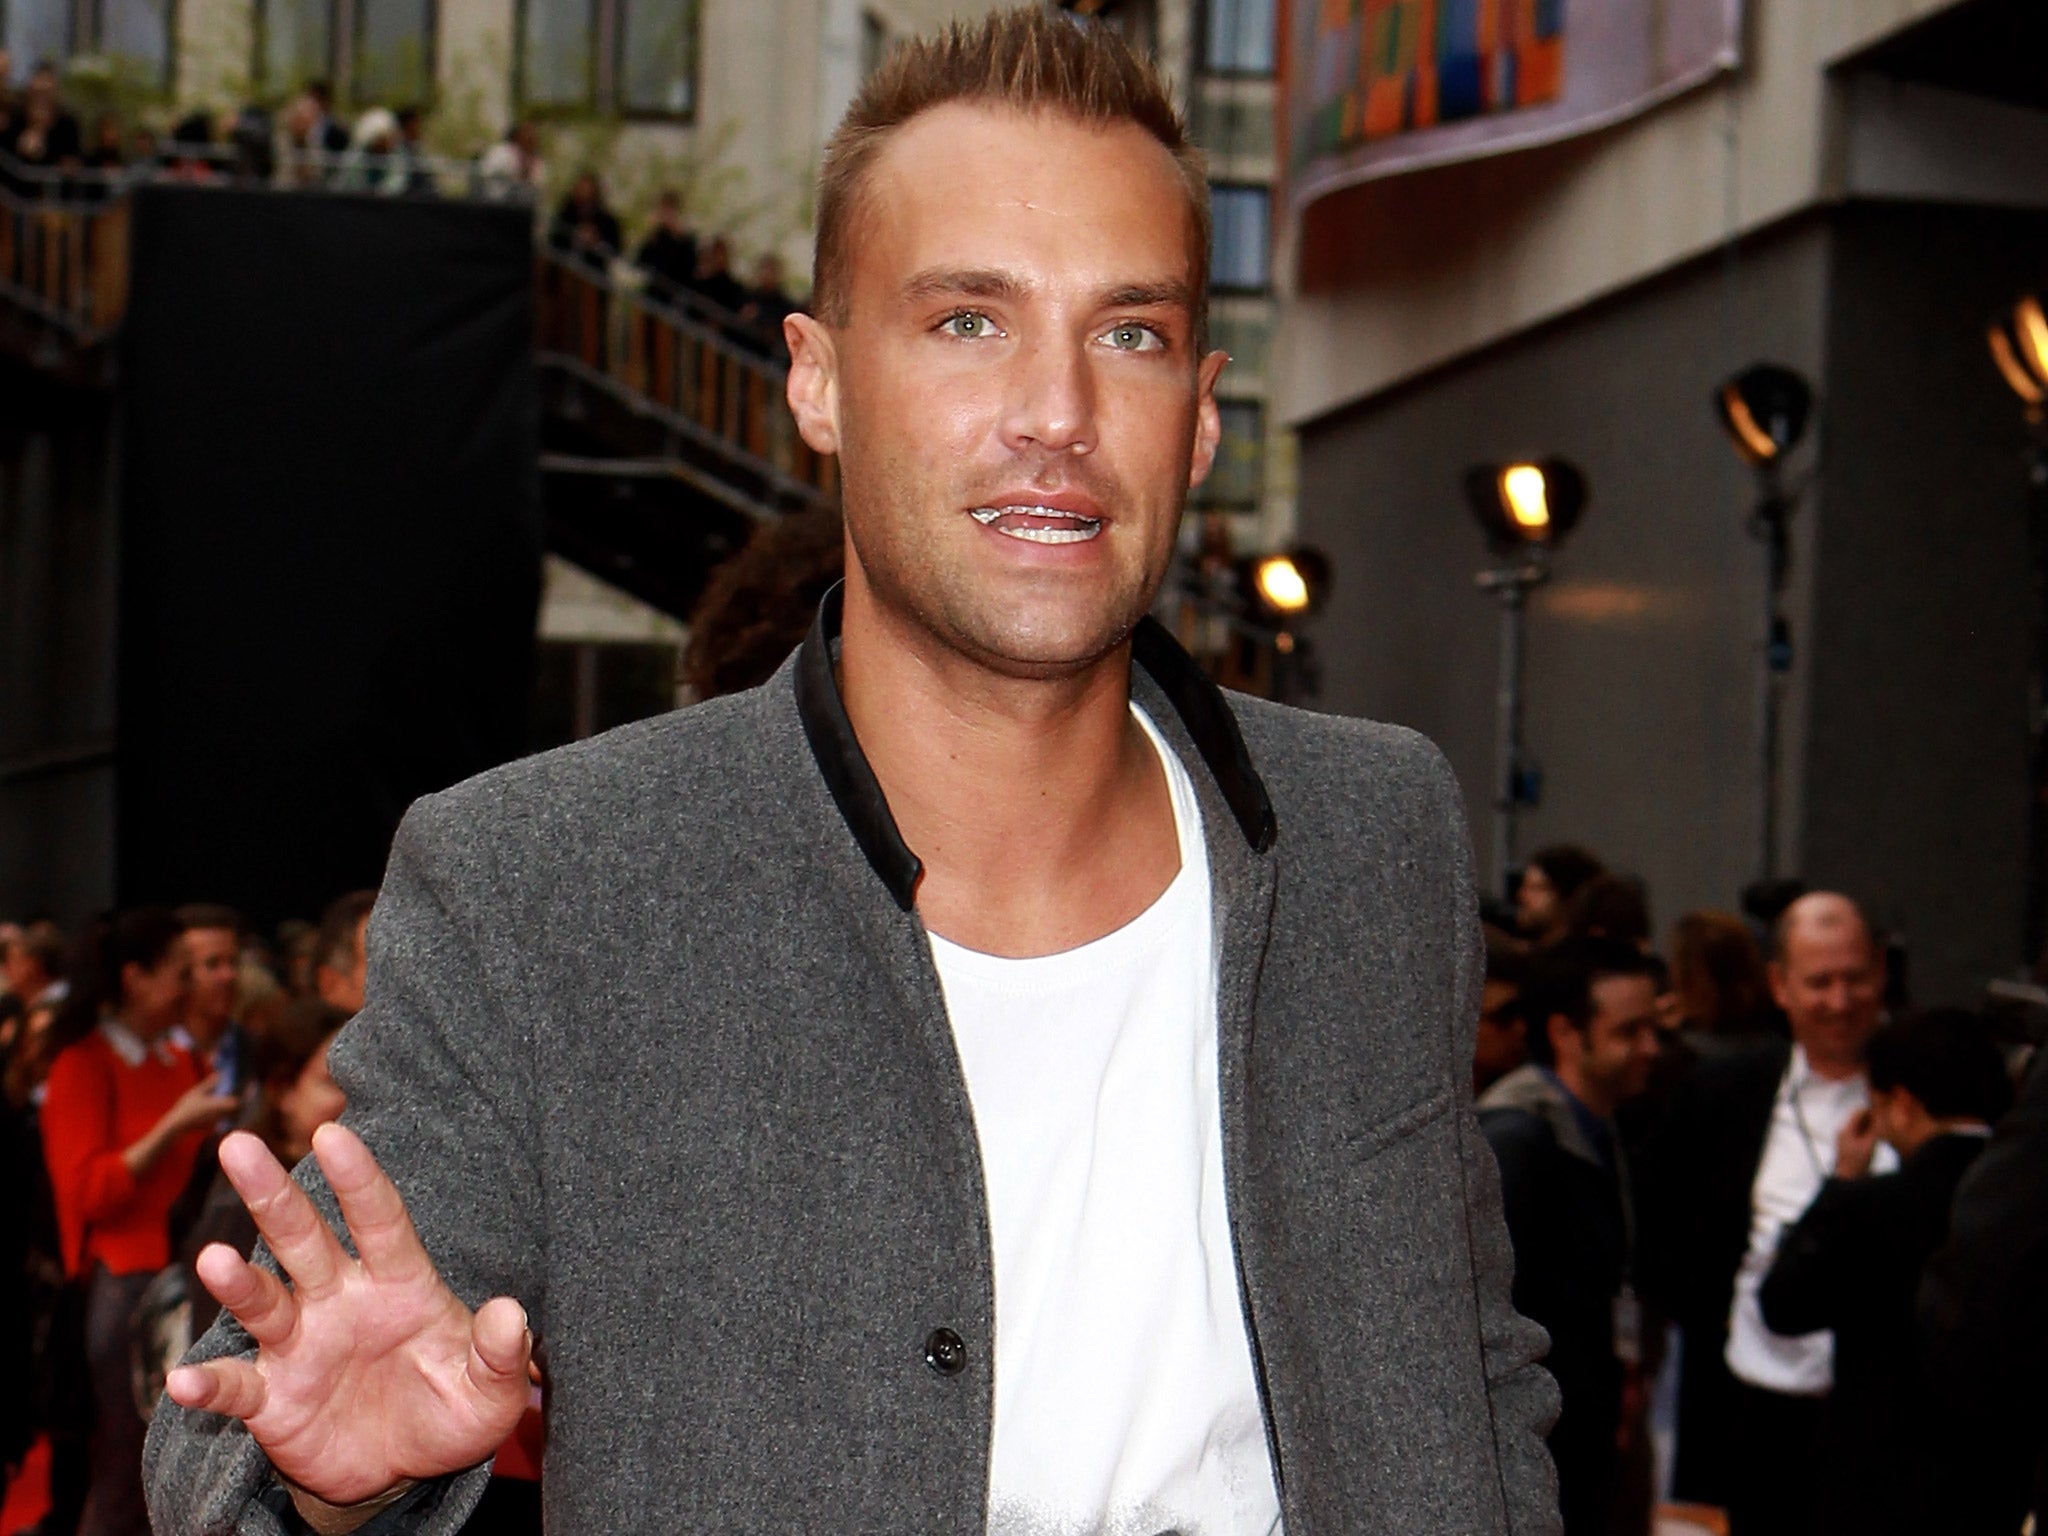 Calum Best is entering the Celebrity Big Brother house